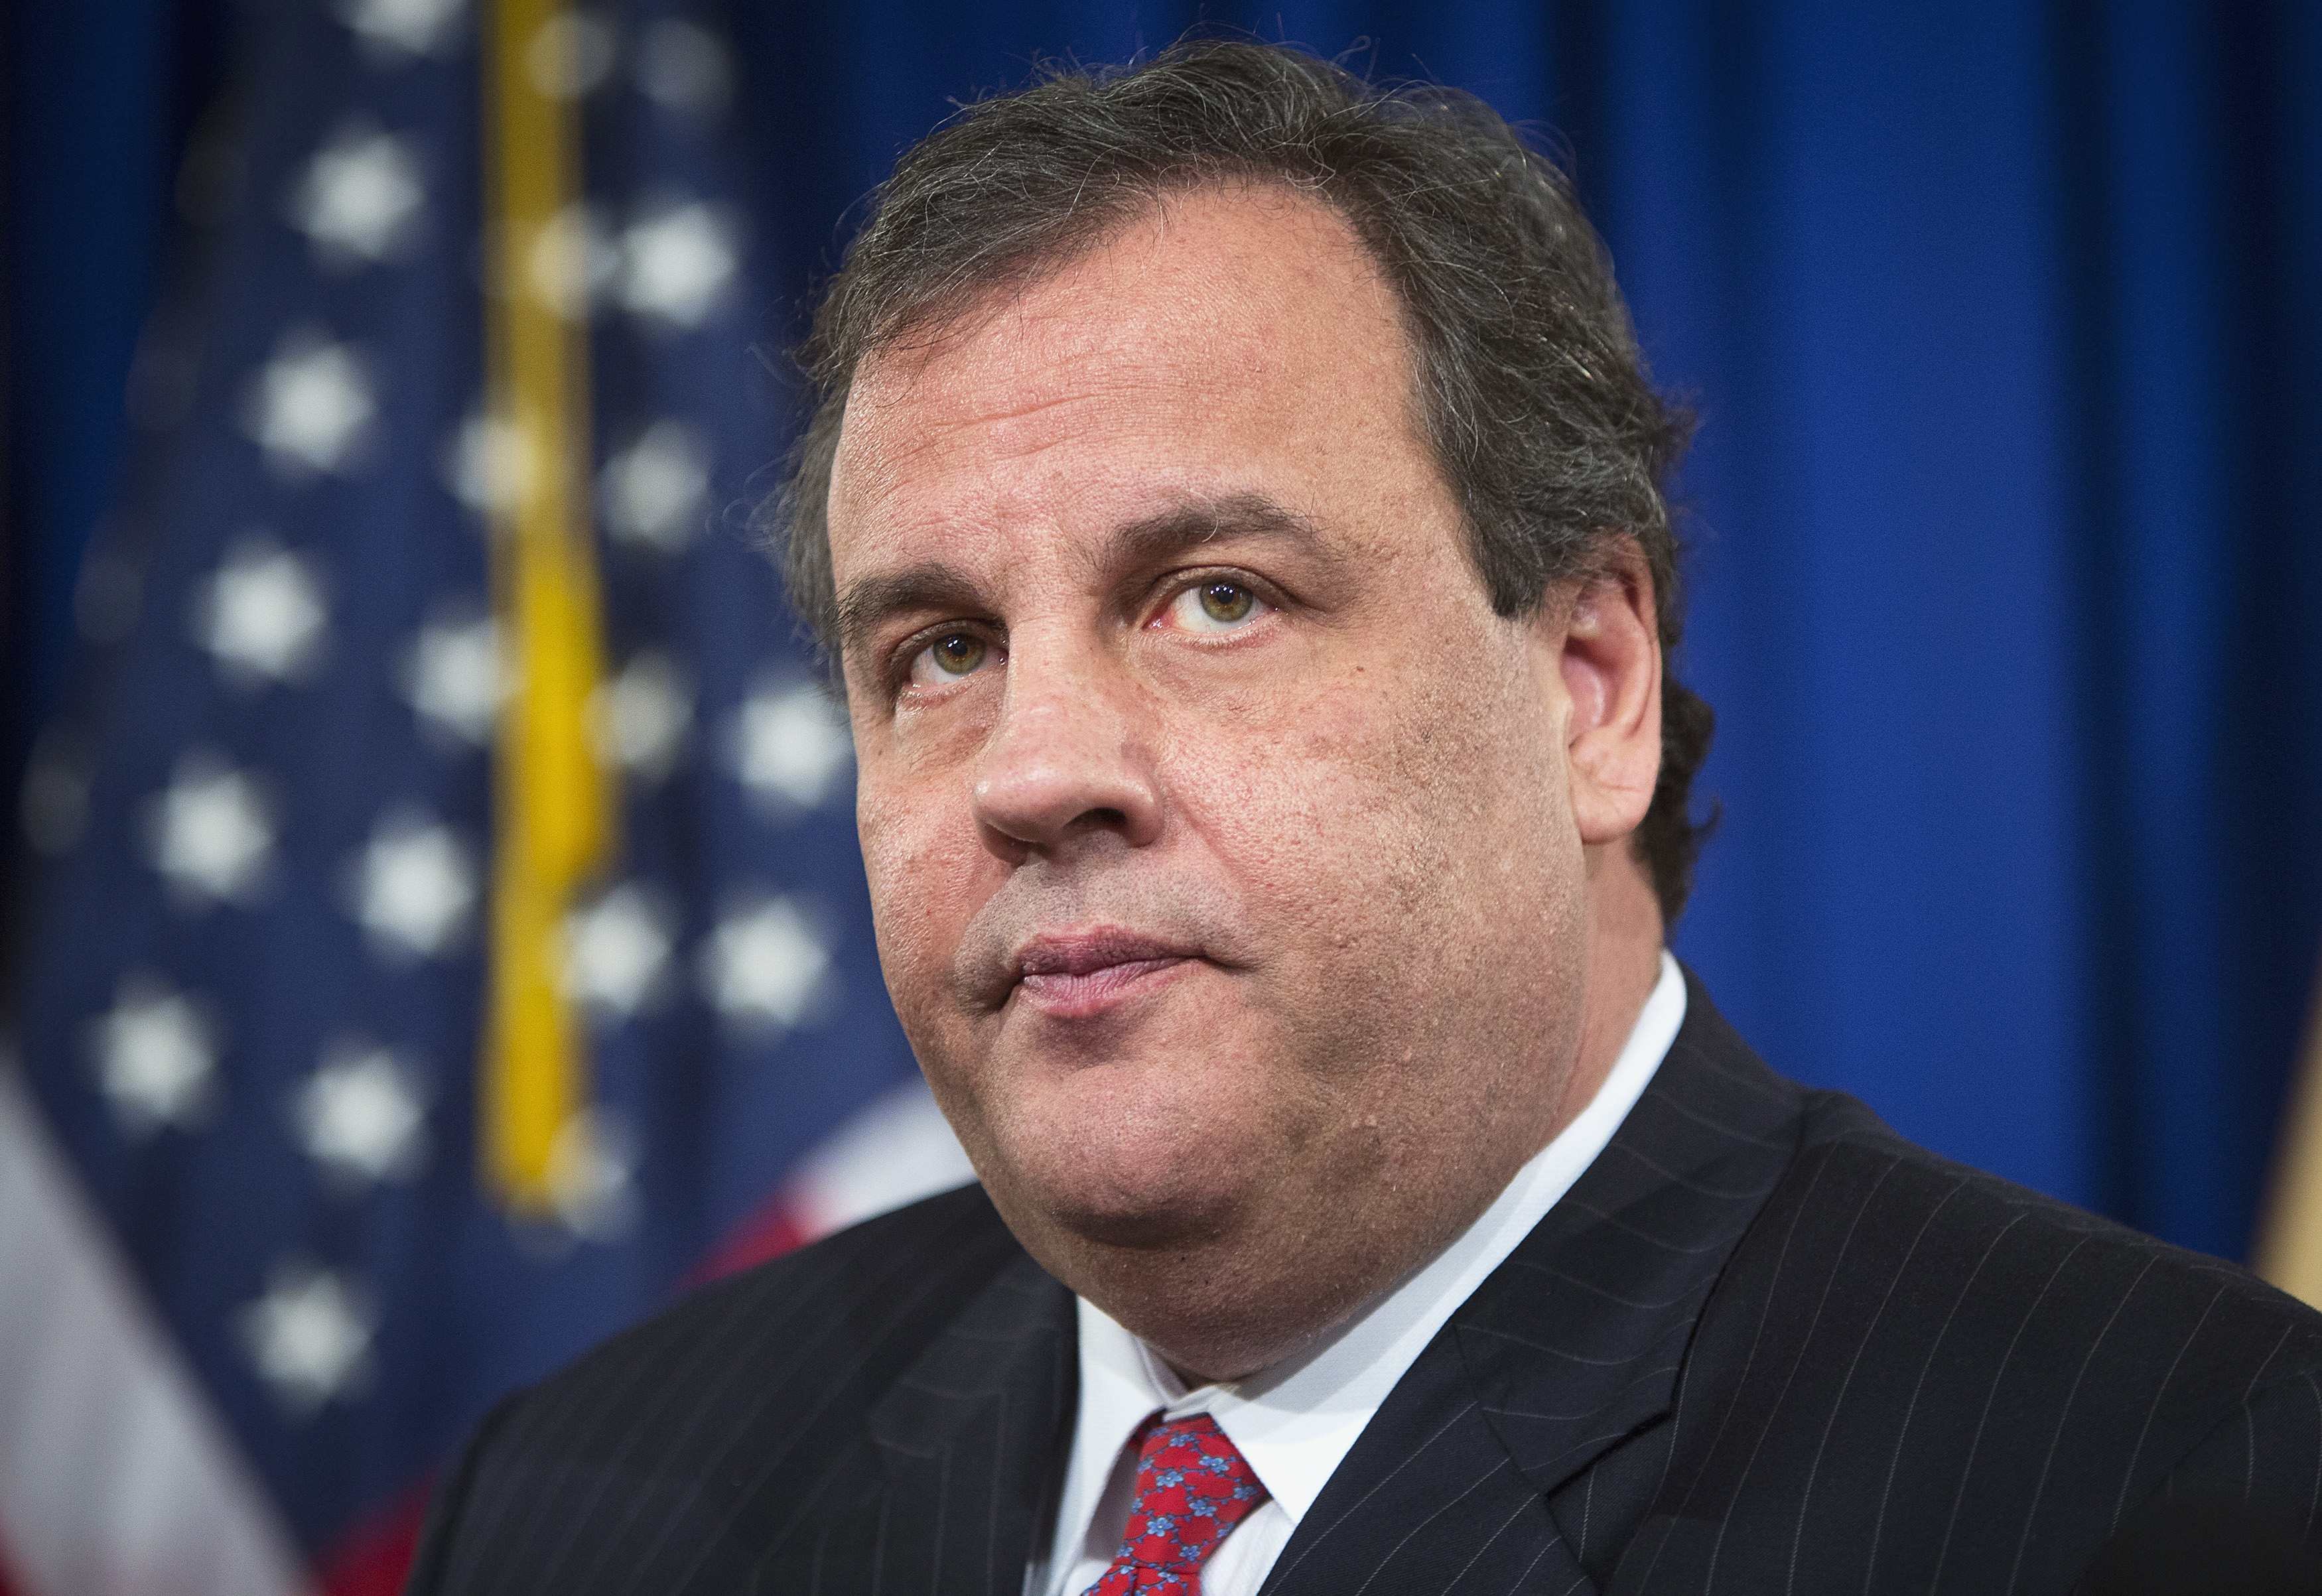 New Jersey Governor Chris Christie gives a news conference in Trenton, January 9, 2014. (Carlo Allegri—Reuters)